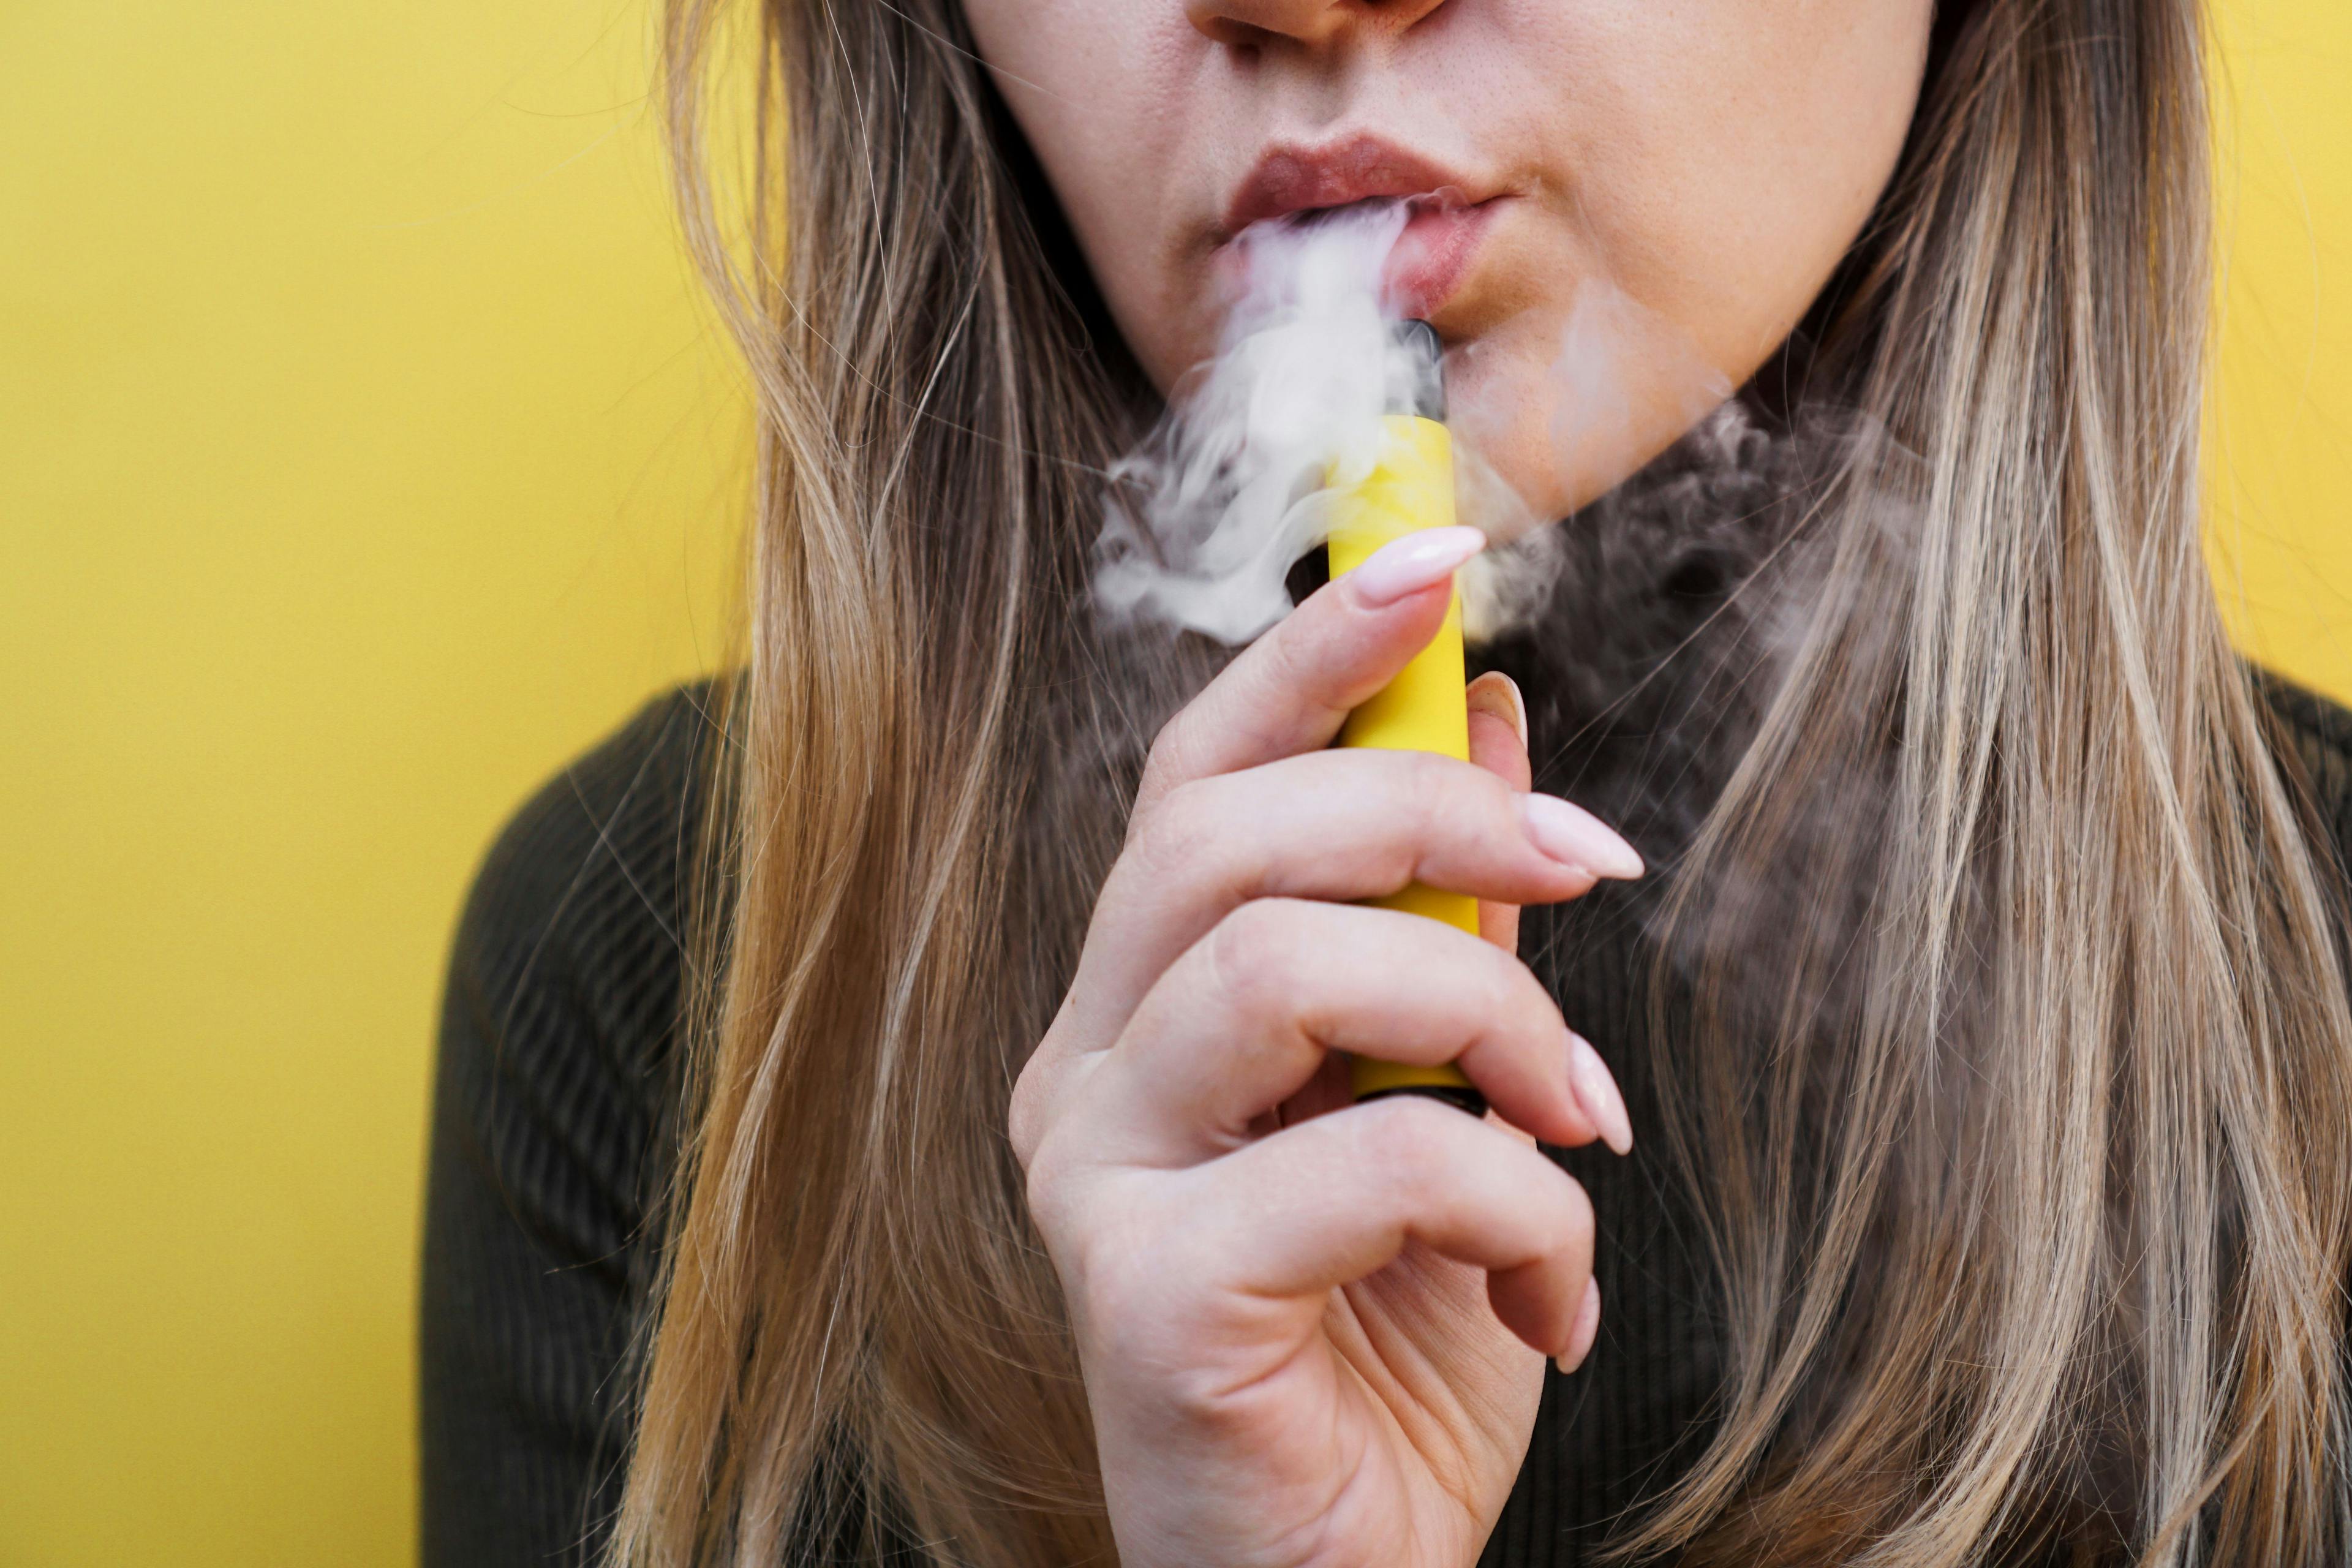 A recent study explored the use of electronic cigarettes compared with other tobacco cessation methods. | image credit: brillianata - stock.adobe.com